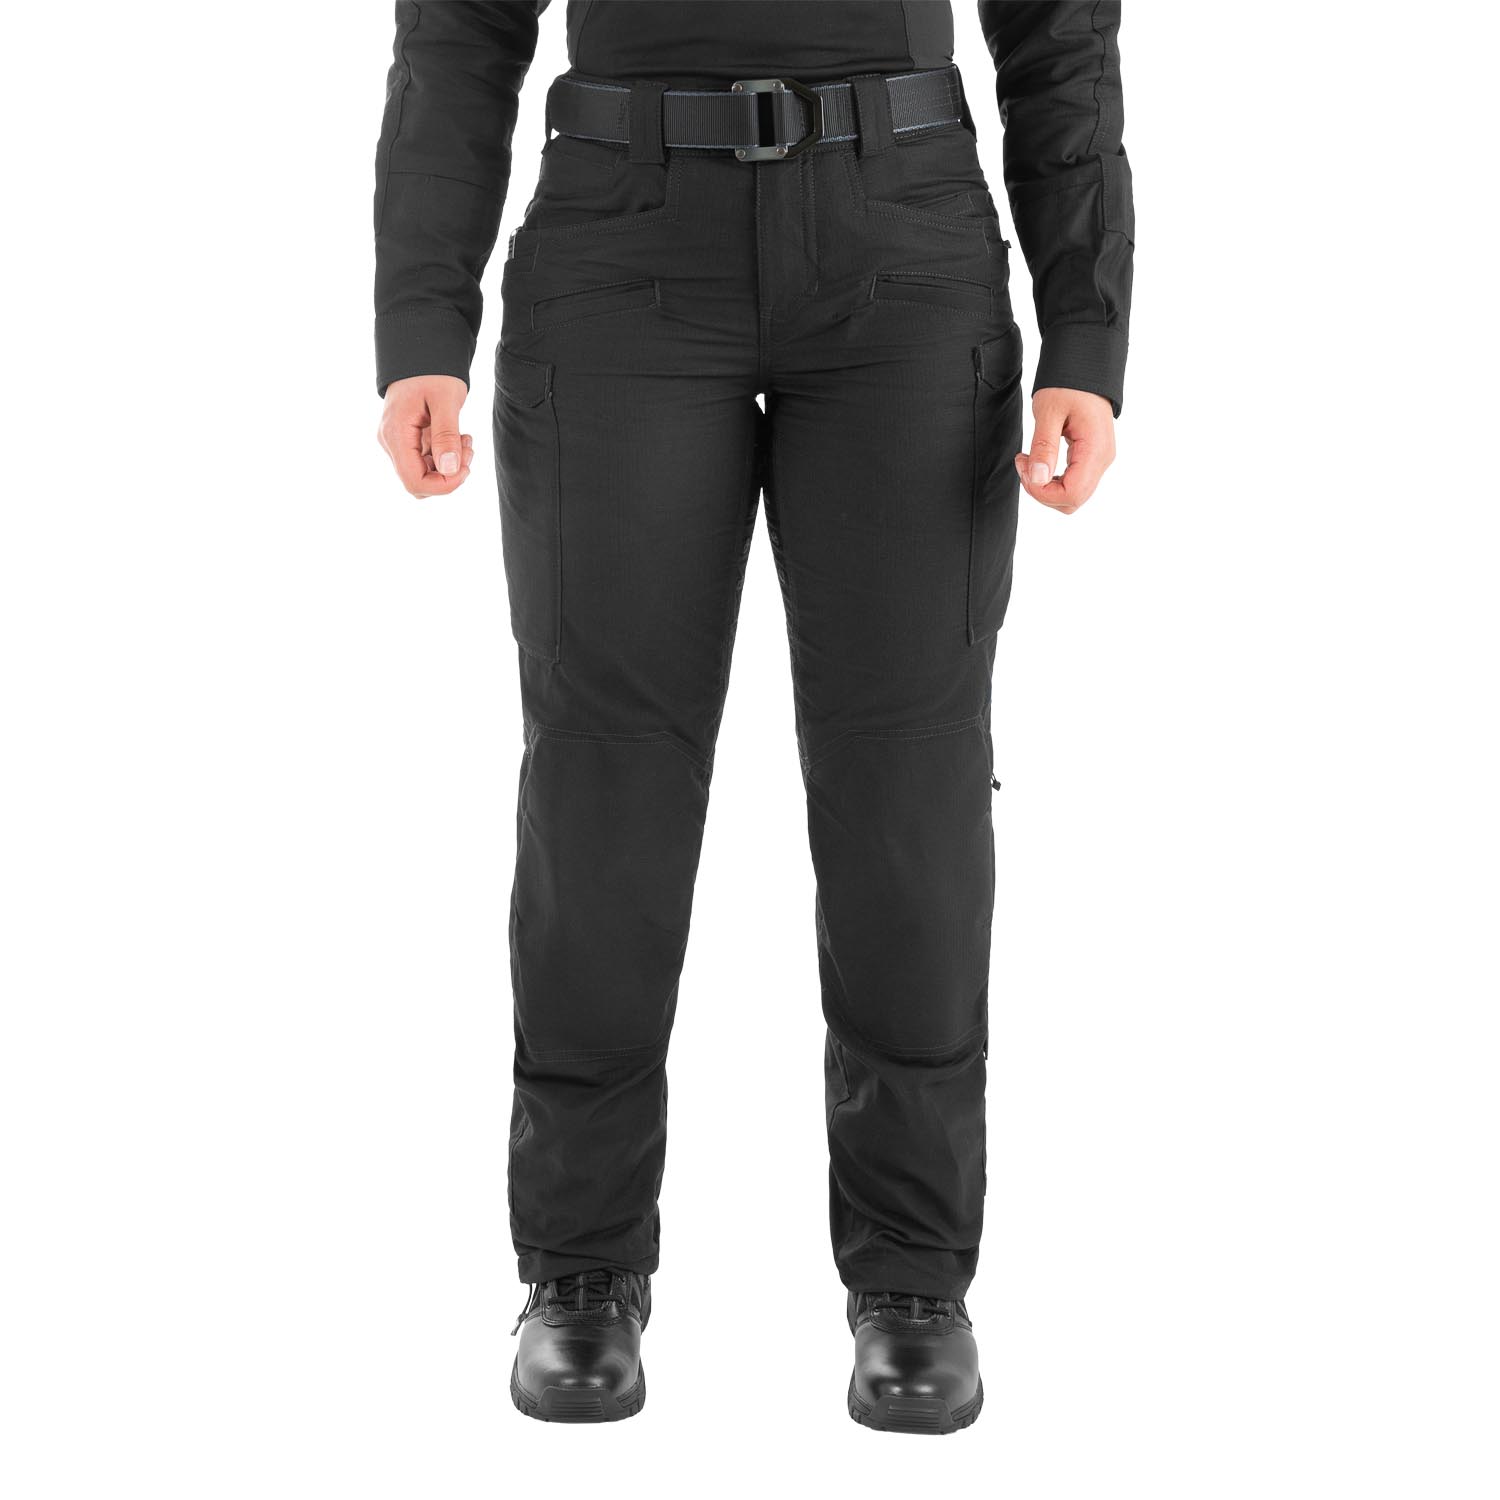 FIRST TACTICAL WOMEN'S DEFENDER PANTS